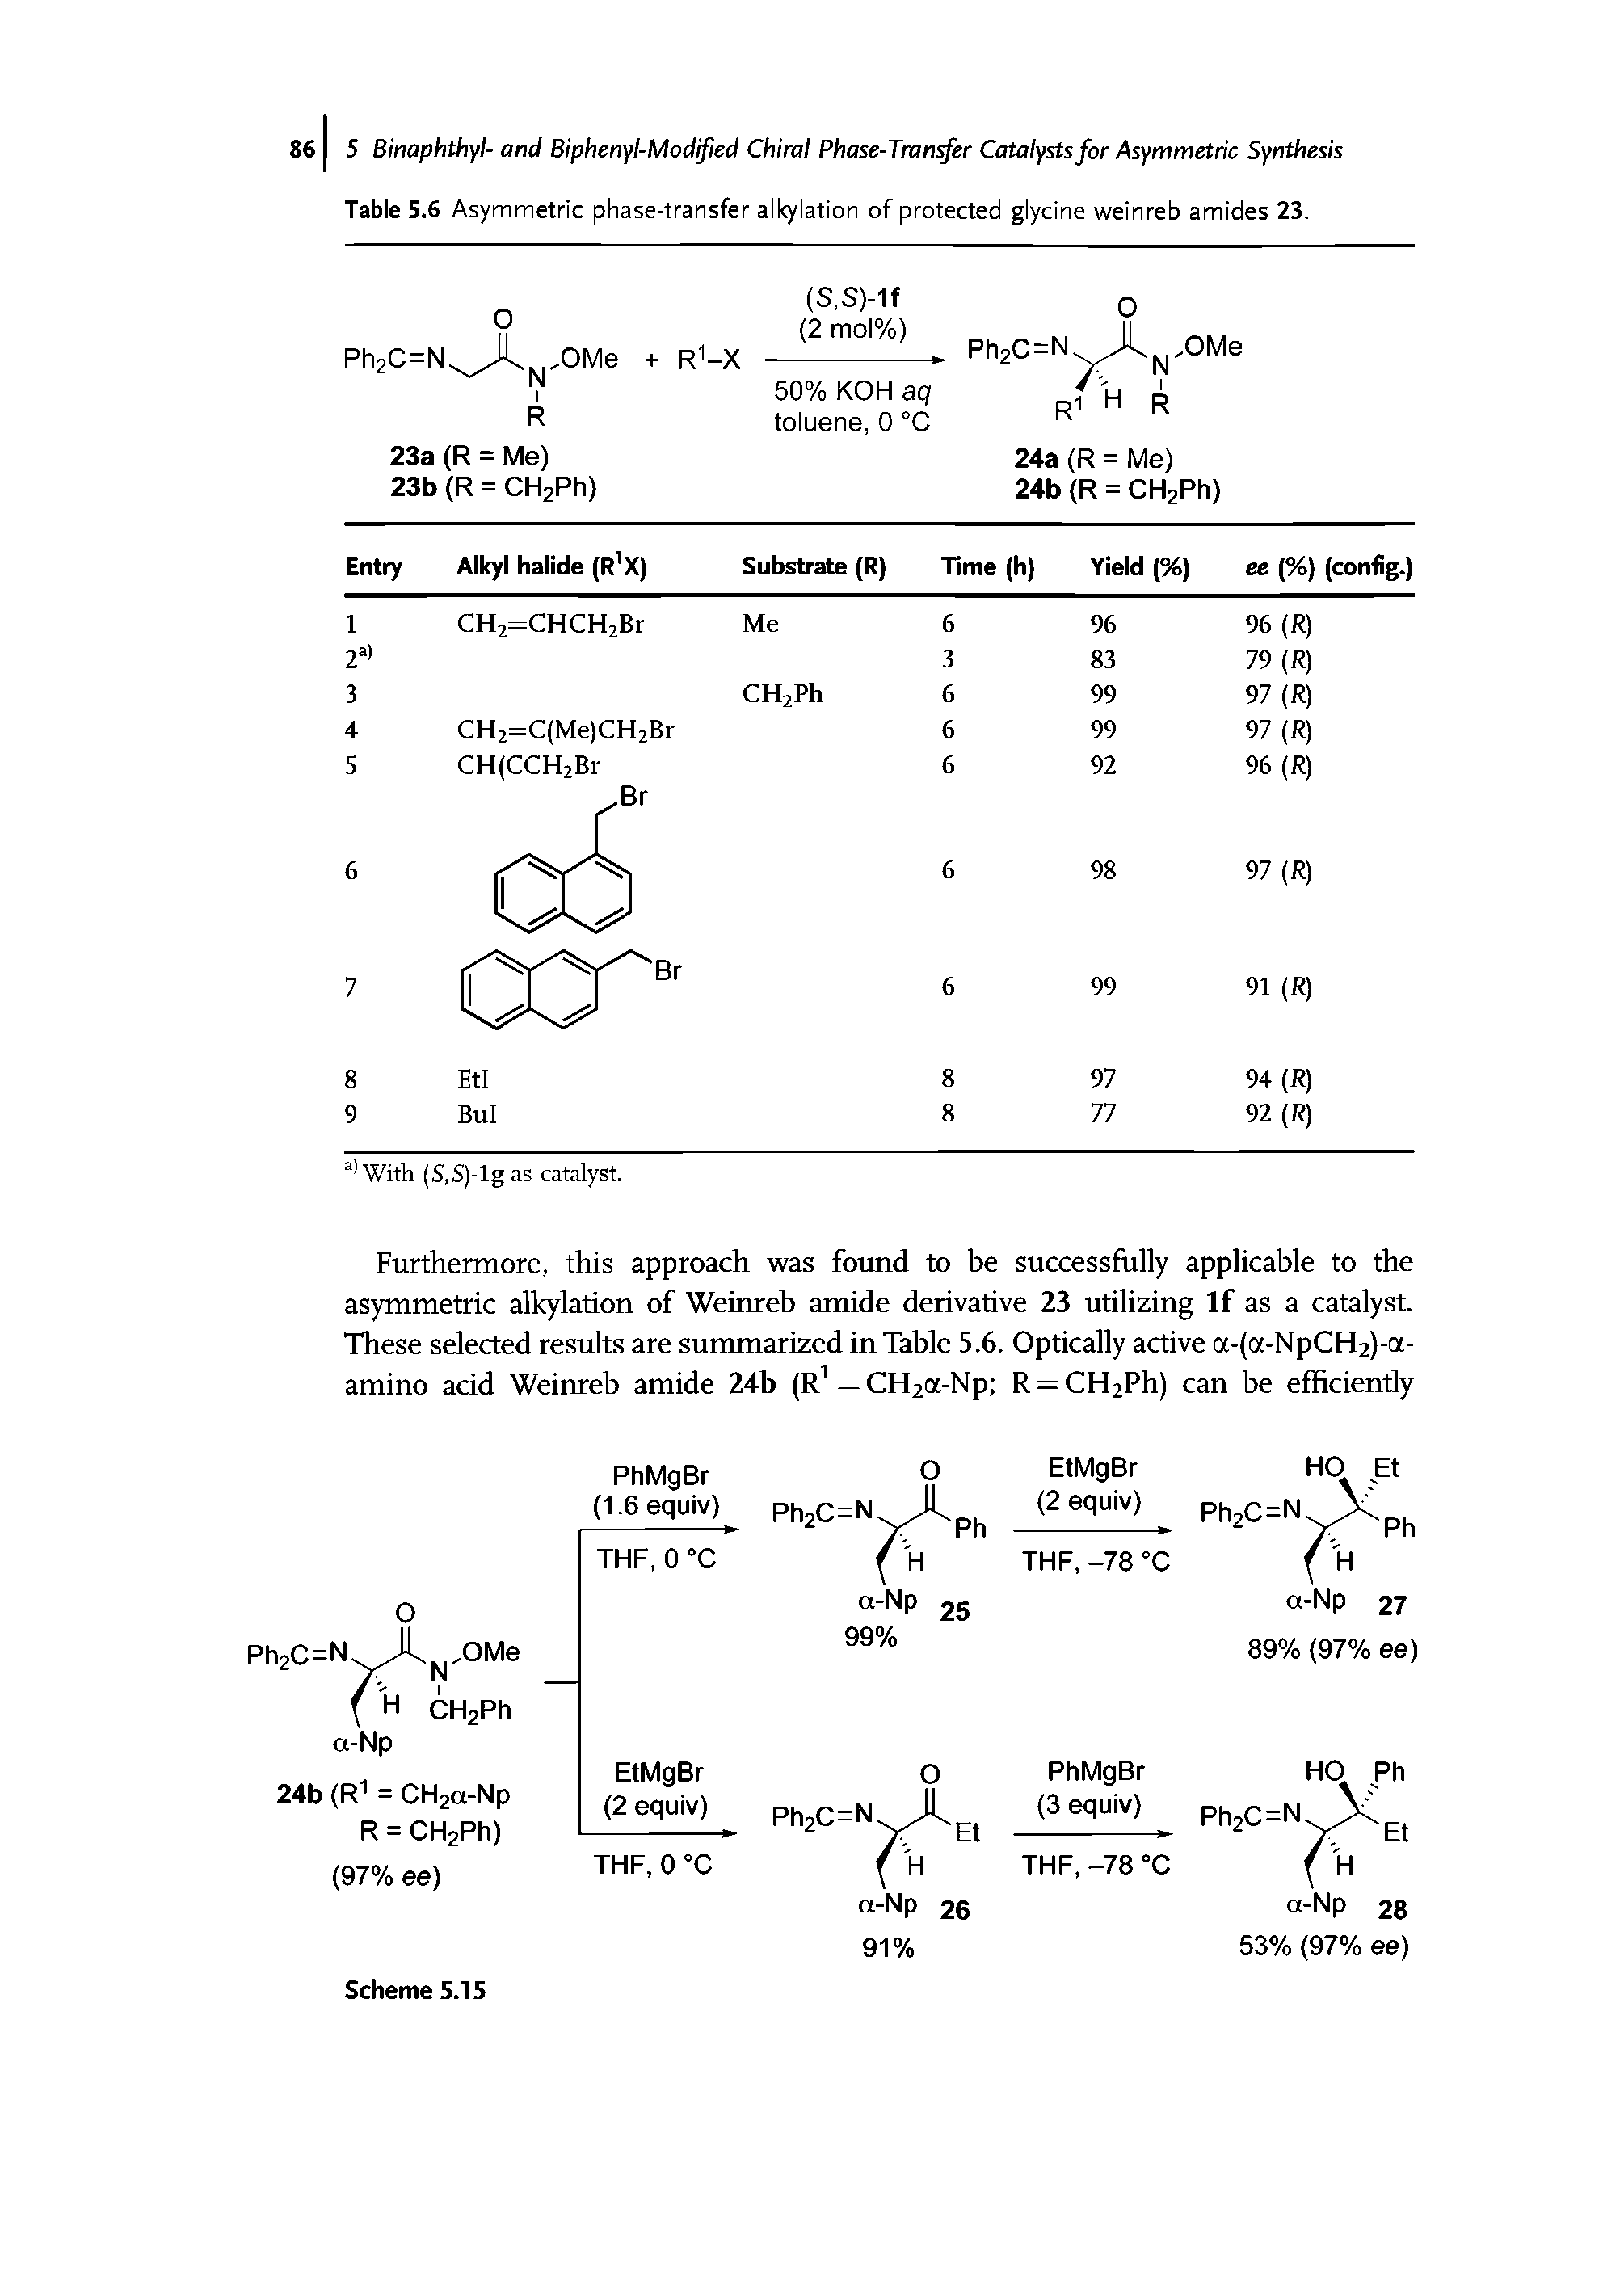 Table 5.6 Asymmetric phase-transfer alkylation of protected glycine weinreb amides 23.